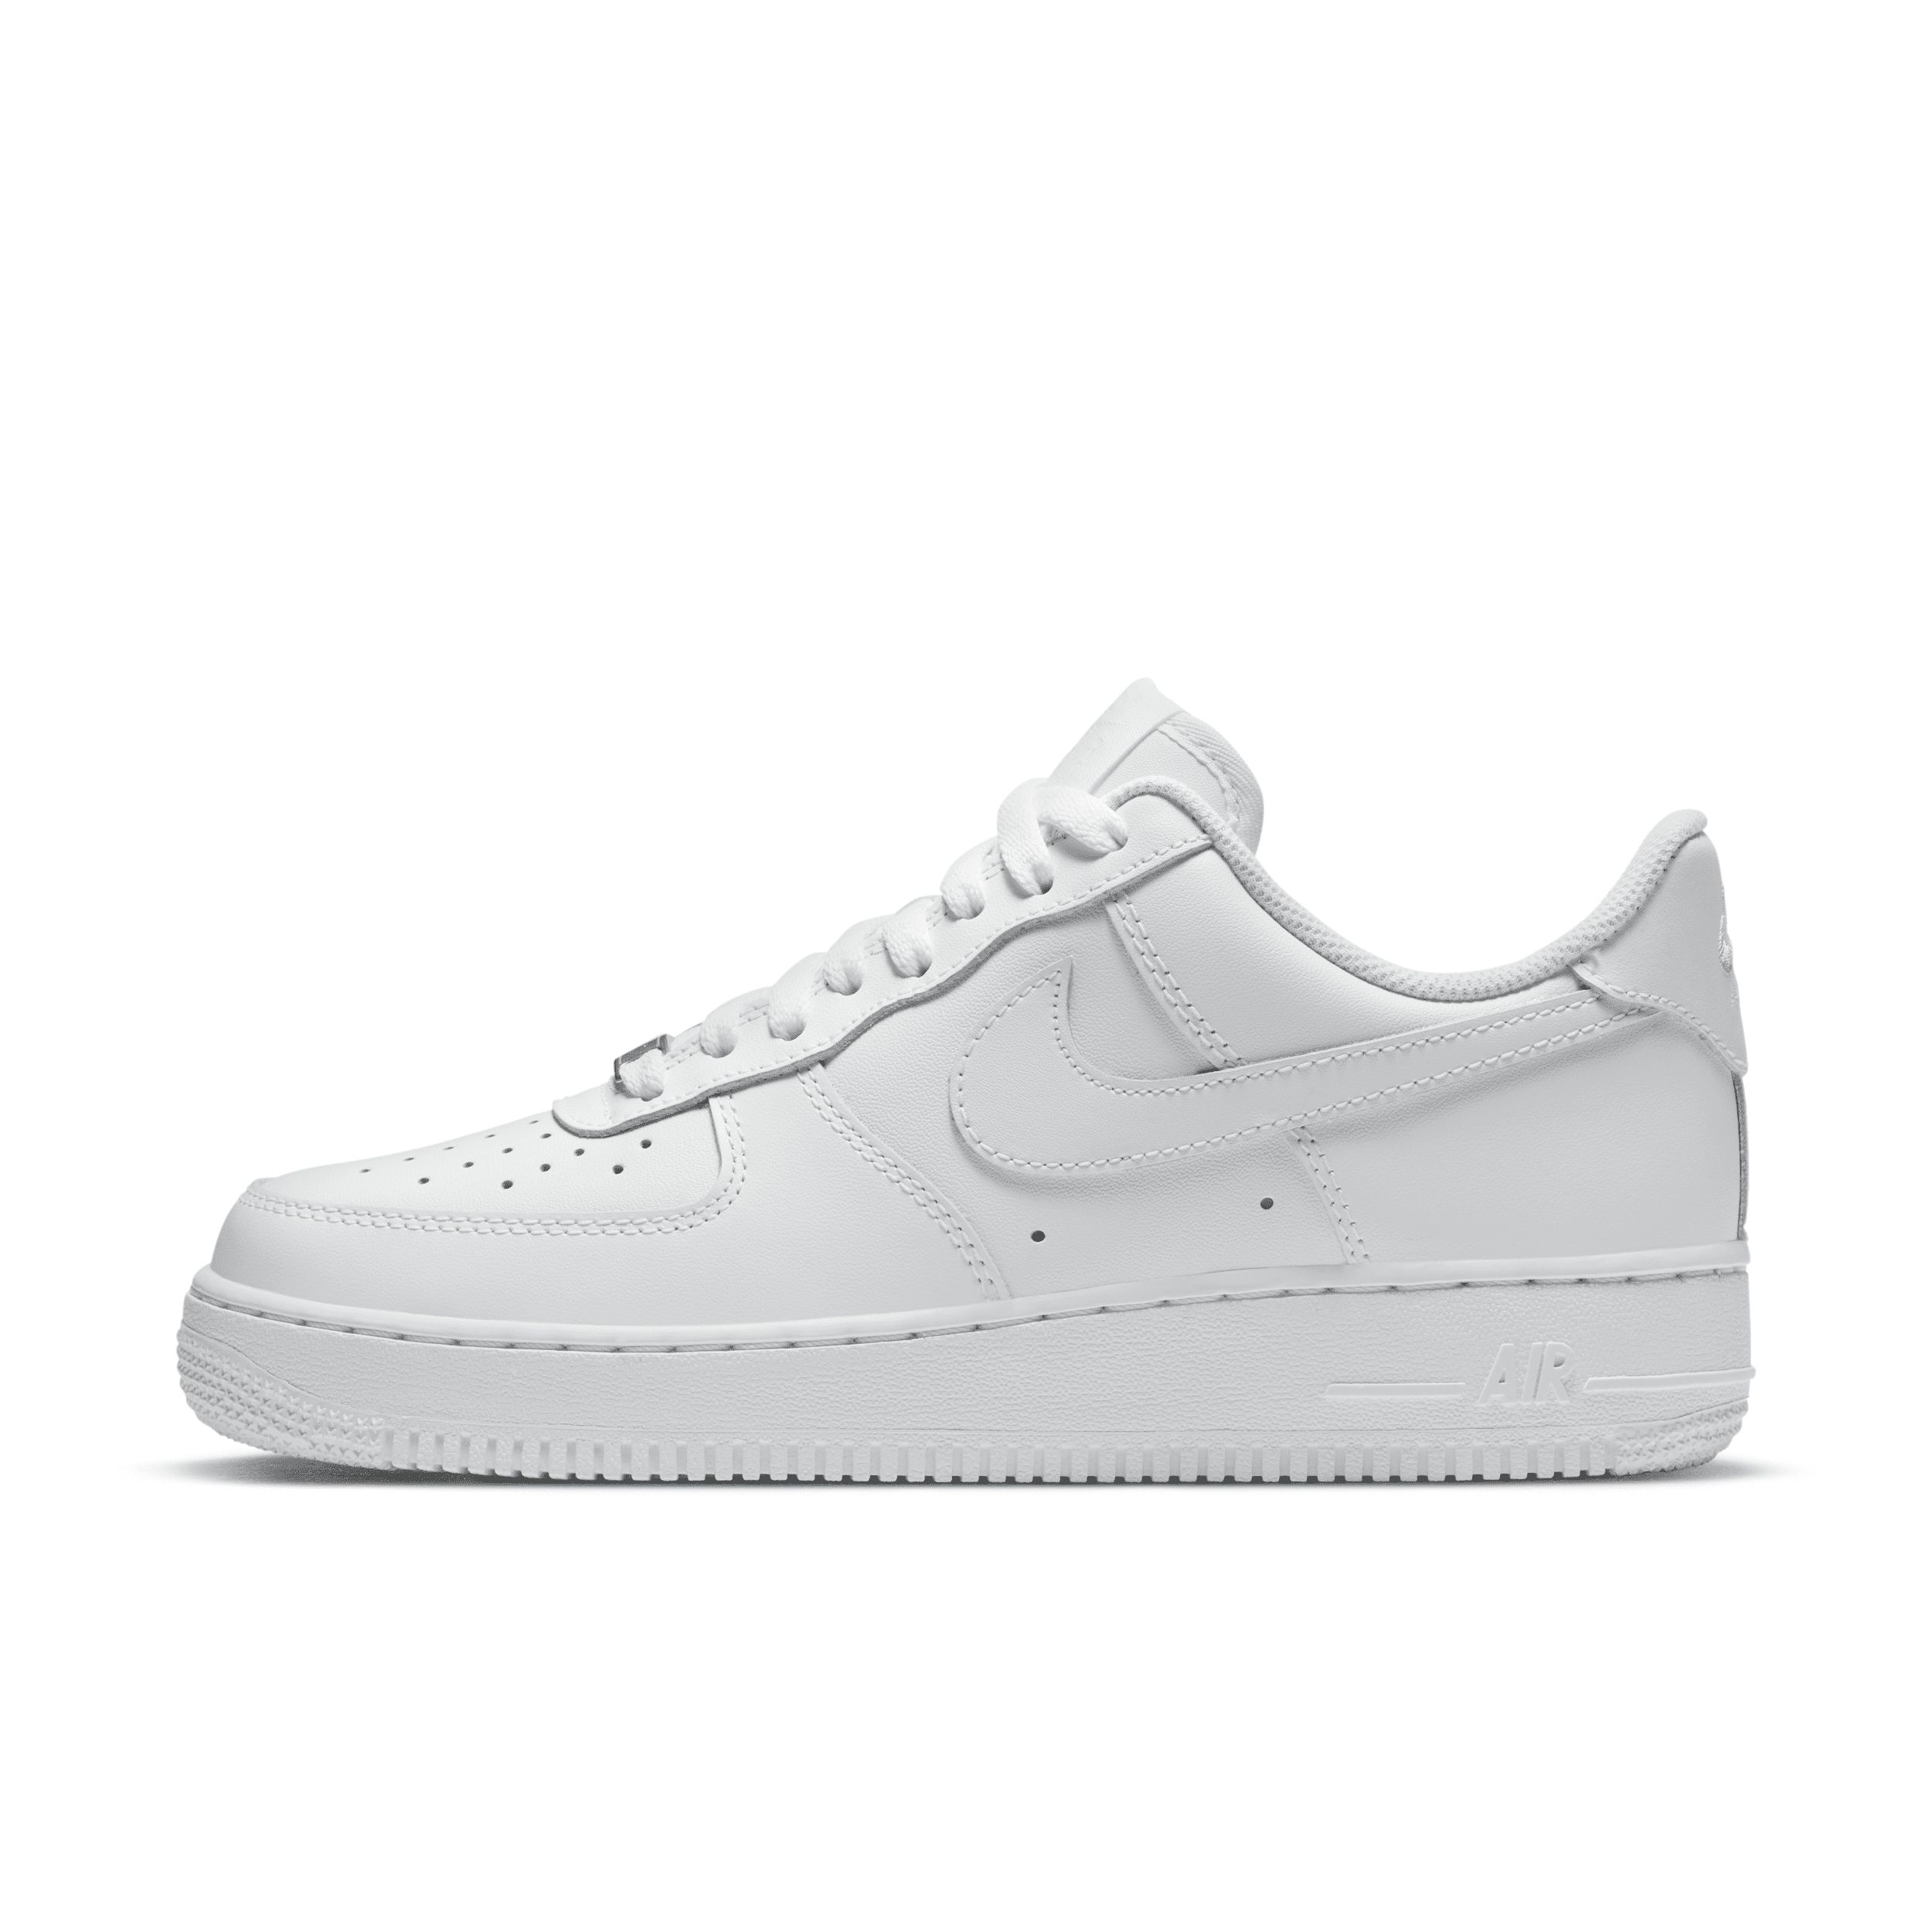 Nike Women's Air Force 1 '07 Shoes in White, Size: 9.5 | DD8959-100 | Nike (US)